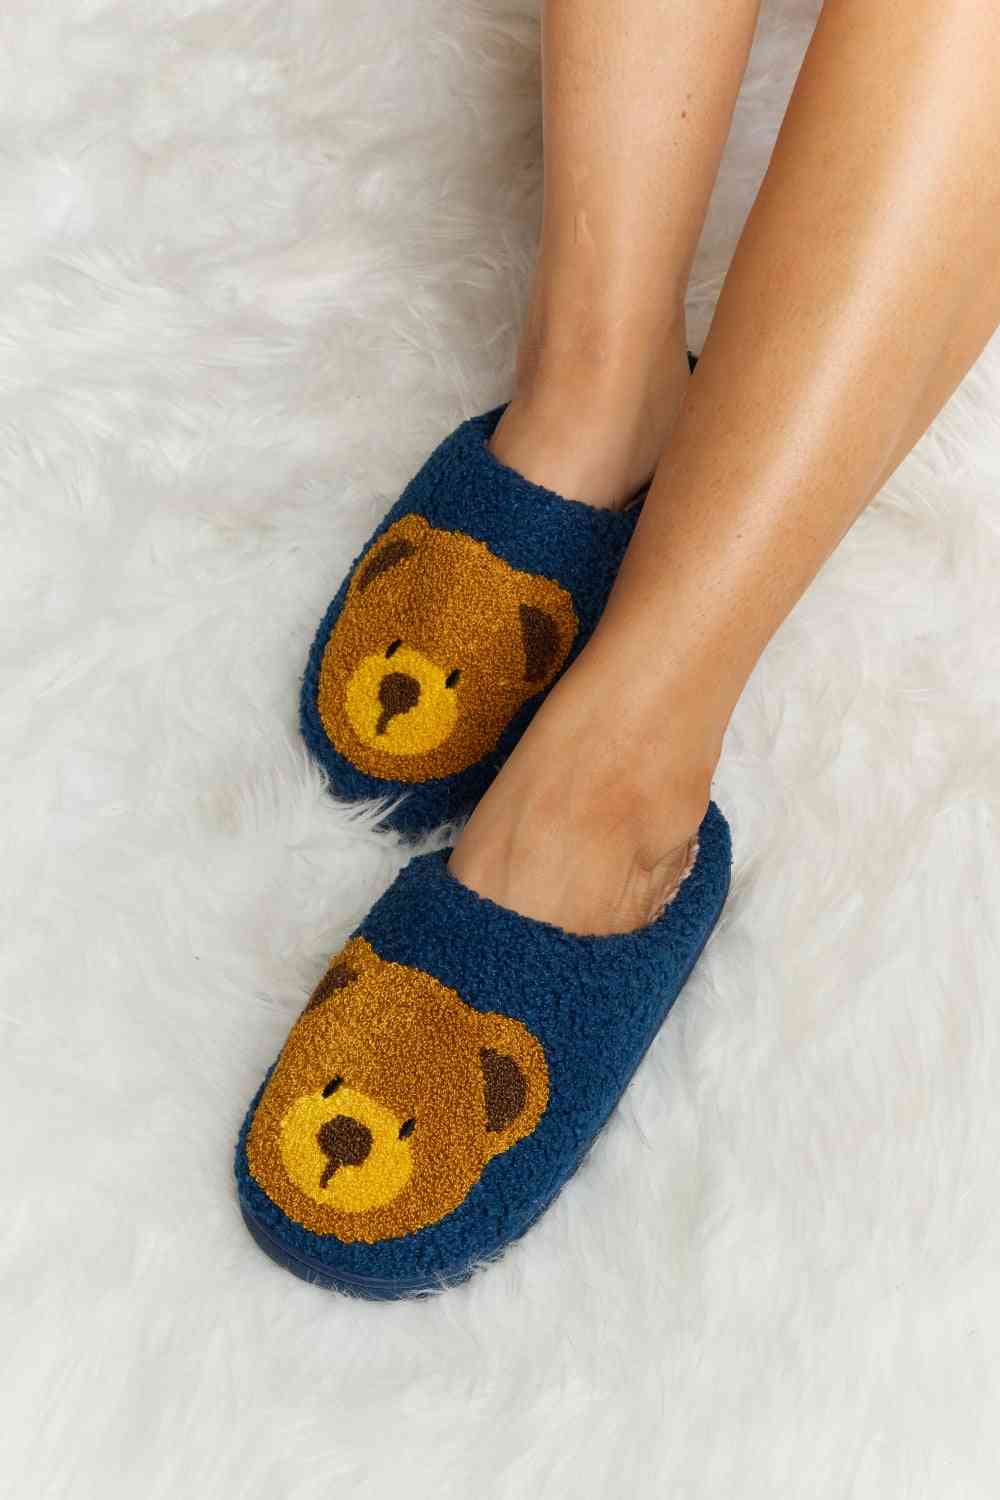 "Image of a pair of Unique Kulture Melody Teddy Bear Print Plush Slide Slippers featuring a cute teddy bear design. These cozy slippers are perfect for lounging and keeping your feet warm and stylish indoors."